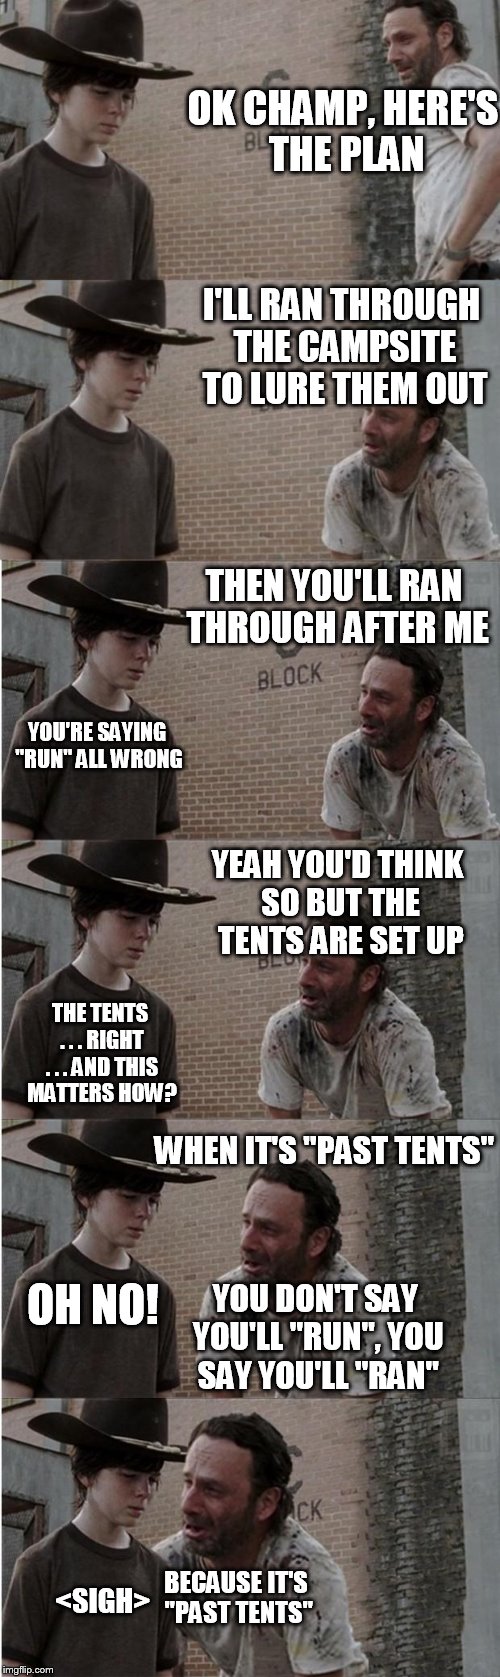 Grammar Loophole | OK CHAMP, HERE'S THE PLAN I'LL RAN THROUGH THE CAMPSITE TO LURE THEM OUT THEN YOU'LL RAN THROUGH AFTER ME YOU'RE SAYING "RUN" ALL WRONG YEAH | image tagged in memes,rick and carl longer | made w/ Imgflip meme maker